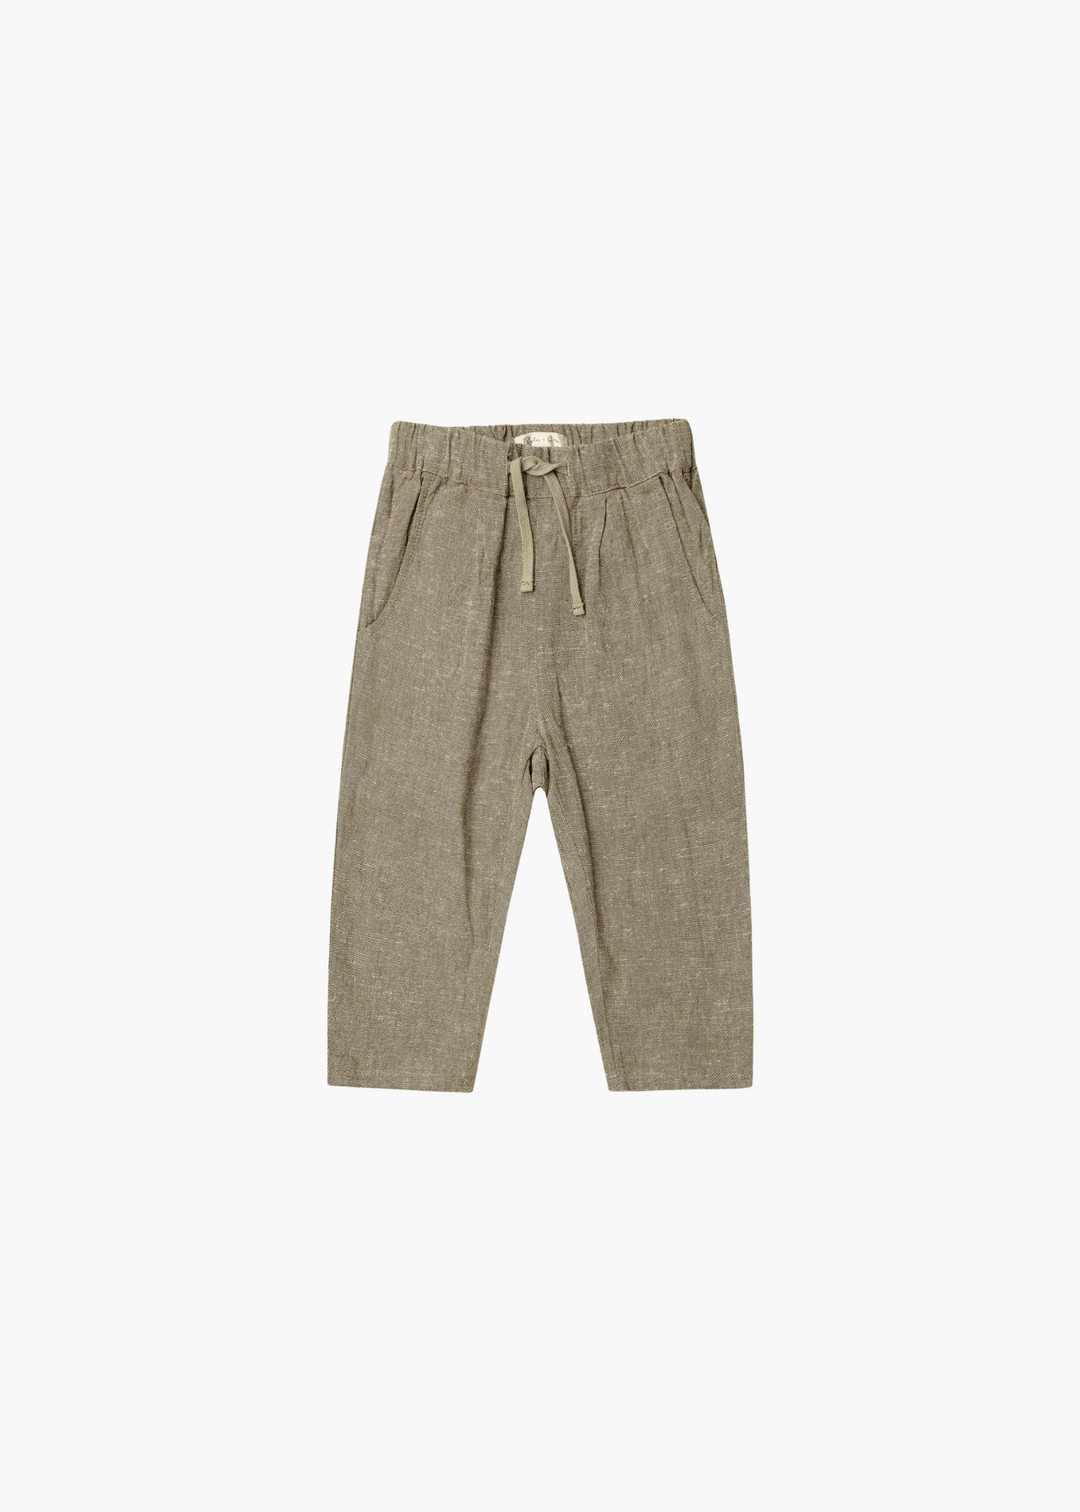 ethan trouser || olive - FINAL SALE